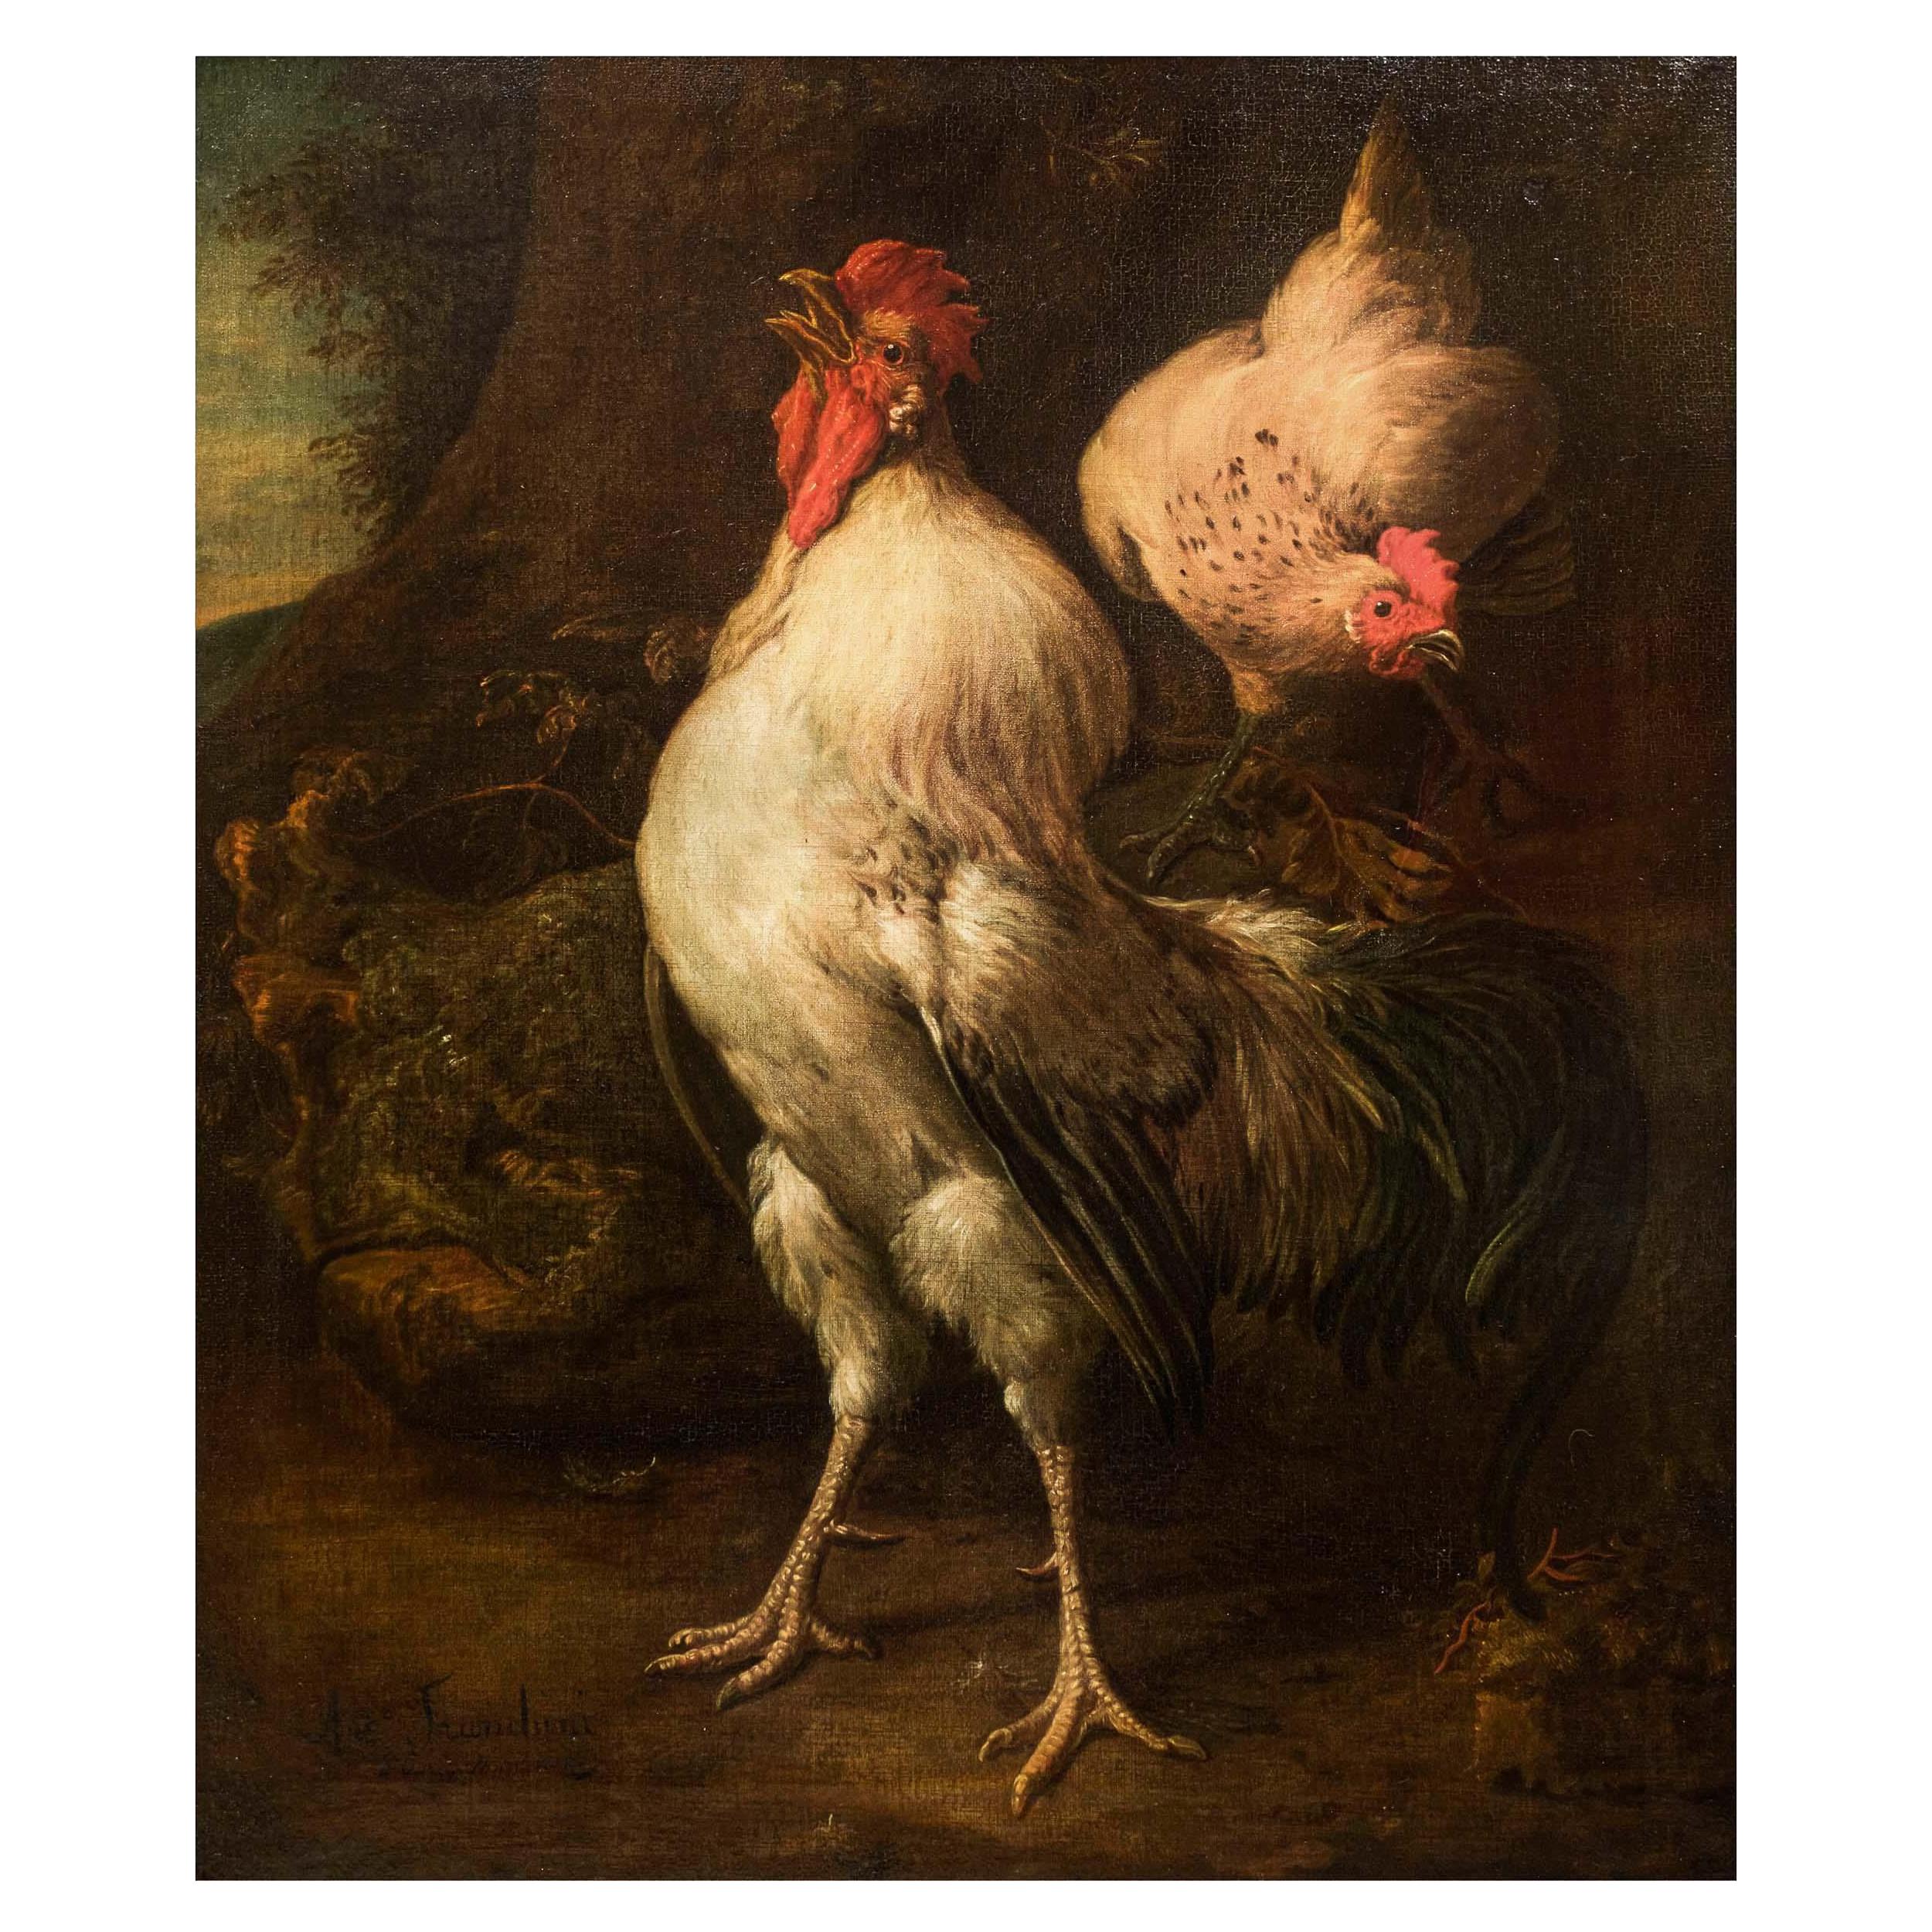 Antique Italian Painting of Rooster "Heralding the Dawn" by Antonio Franchini